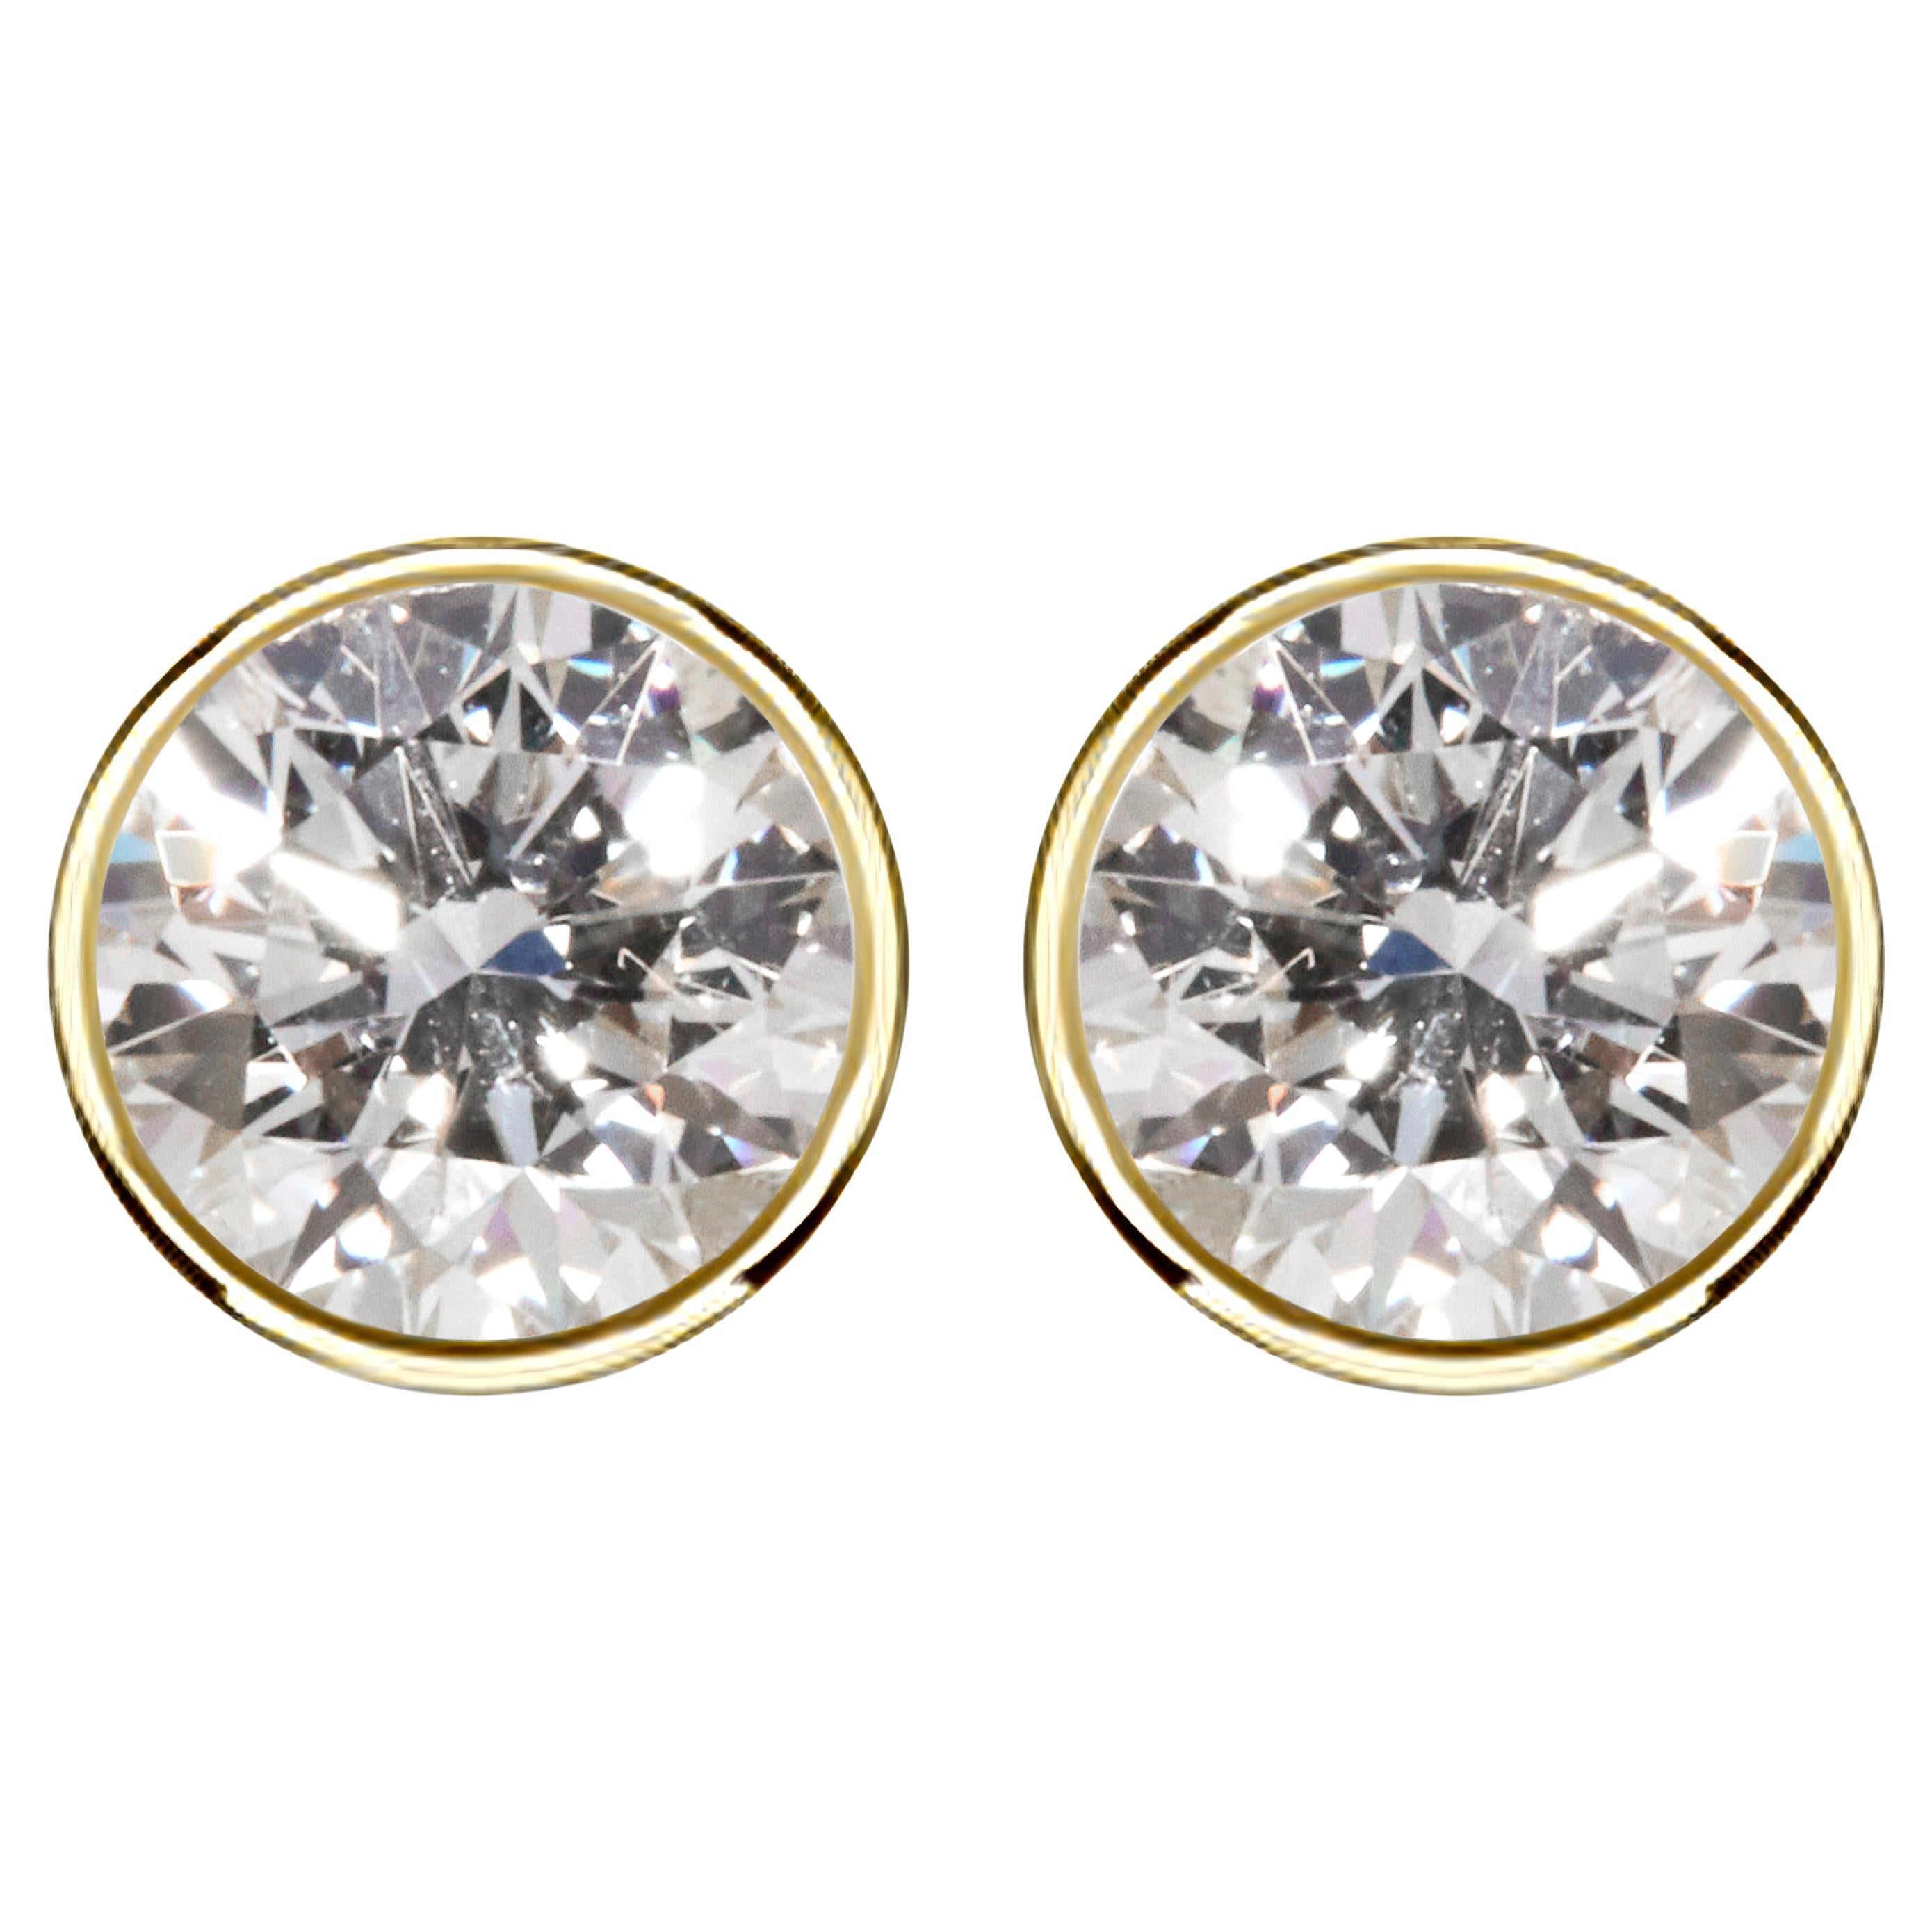 Near 1 Carat Ct 2 Natural Real Solitaire Diamond Stud Earrings 14k Yellow Gold